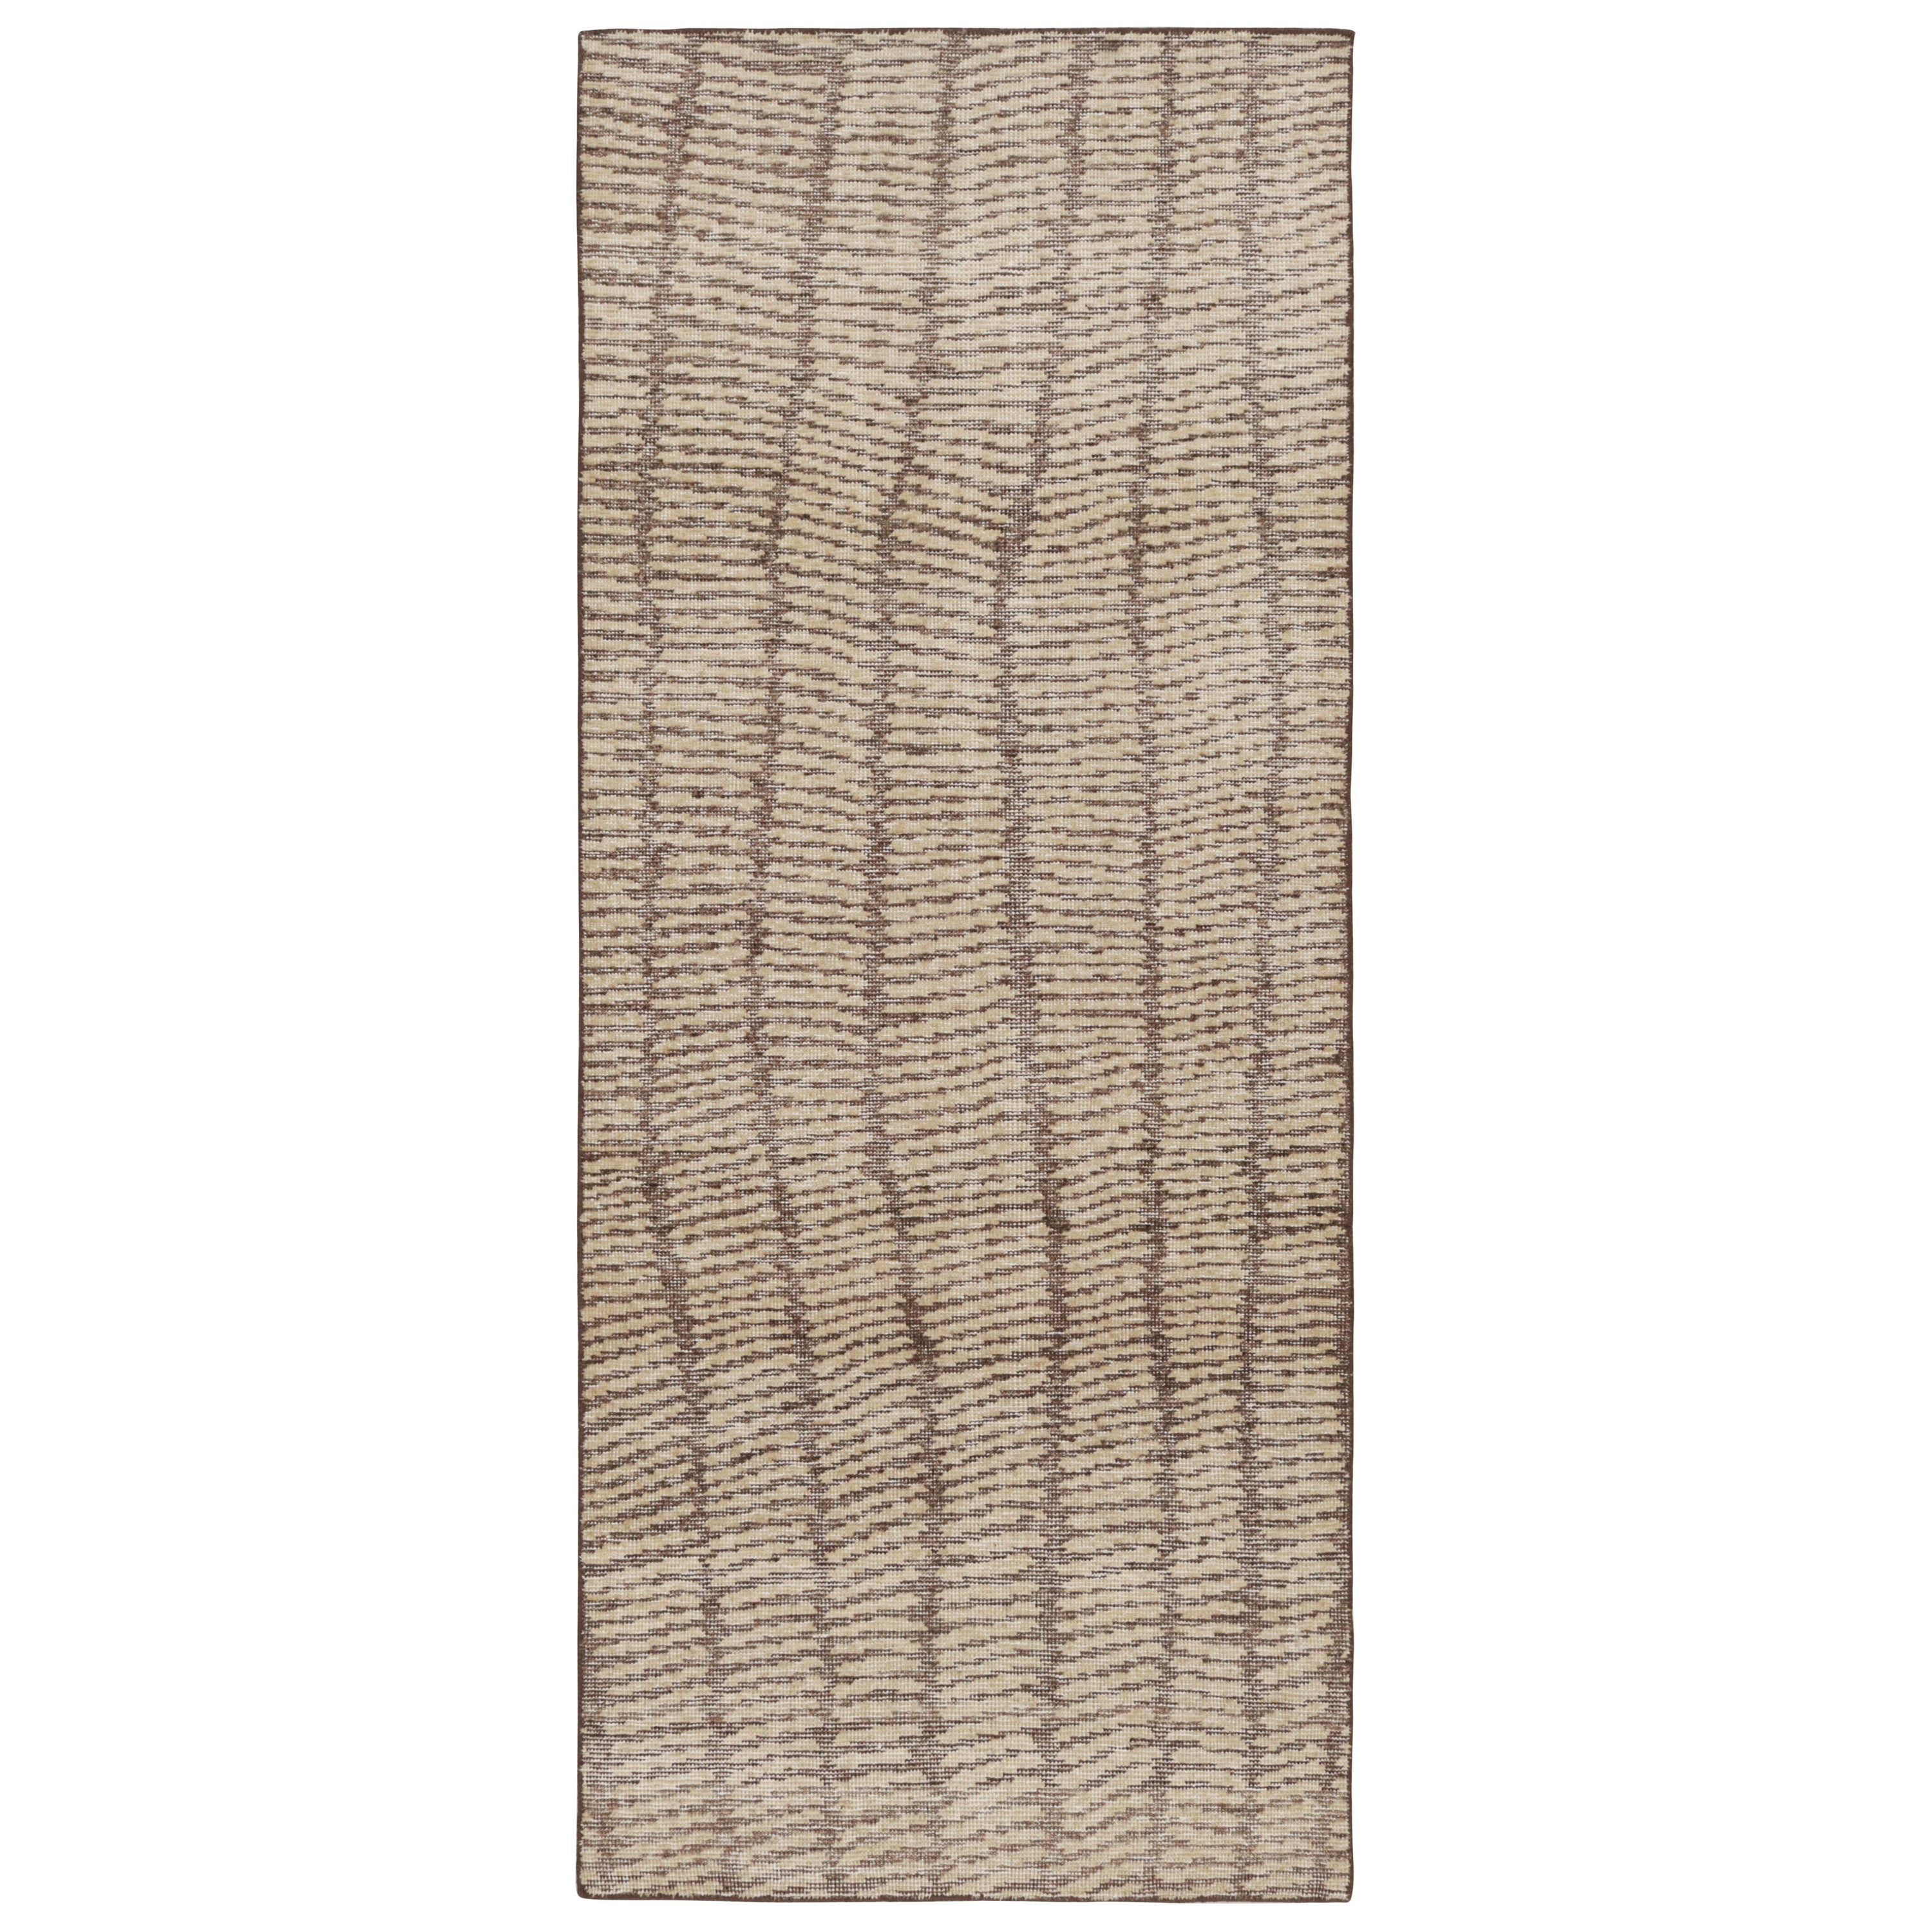 Rug & Kilim’s Custom Abstract Rug With Beige-Brown Striped Geometric Patterns  For Sale